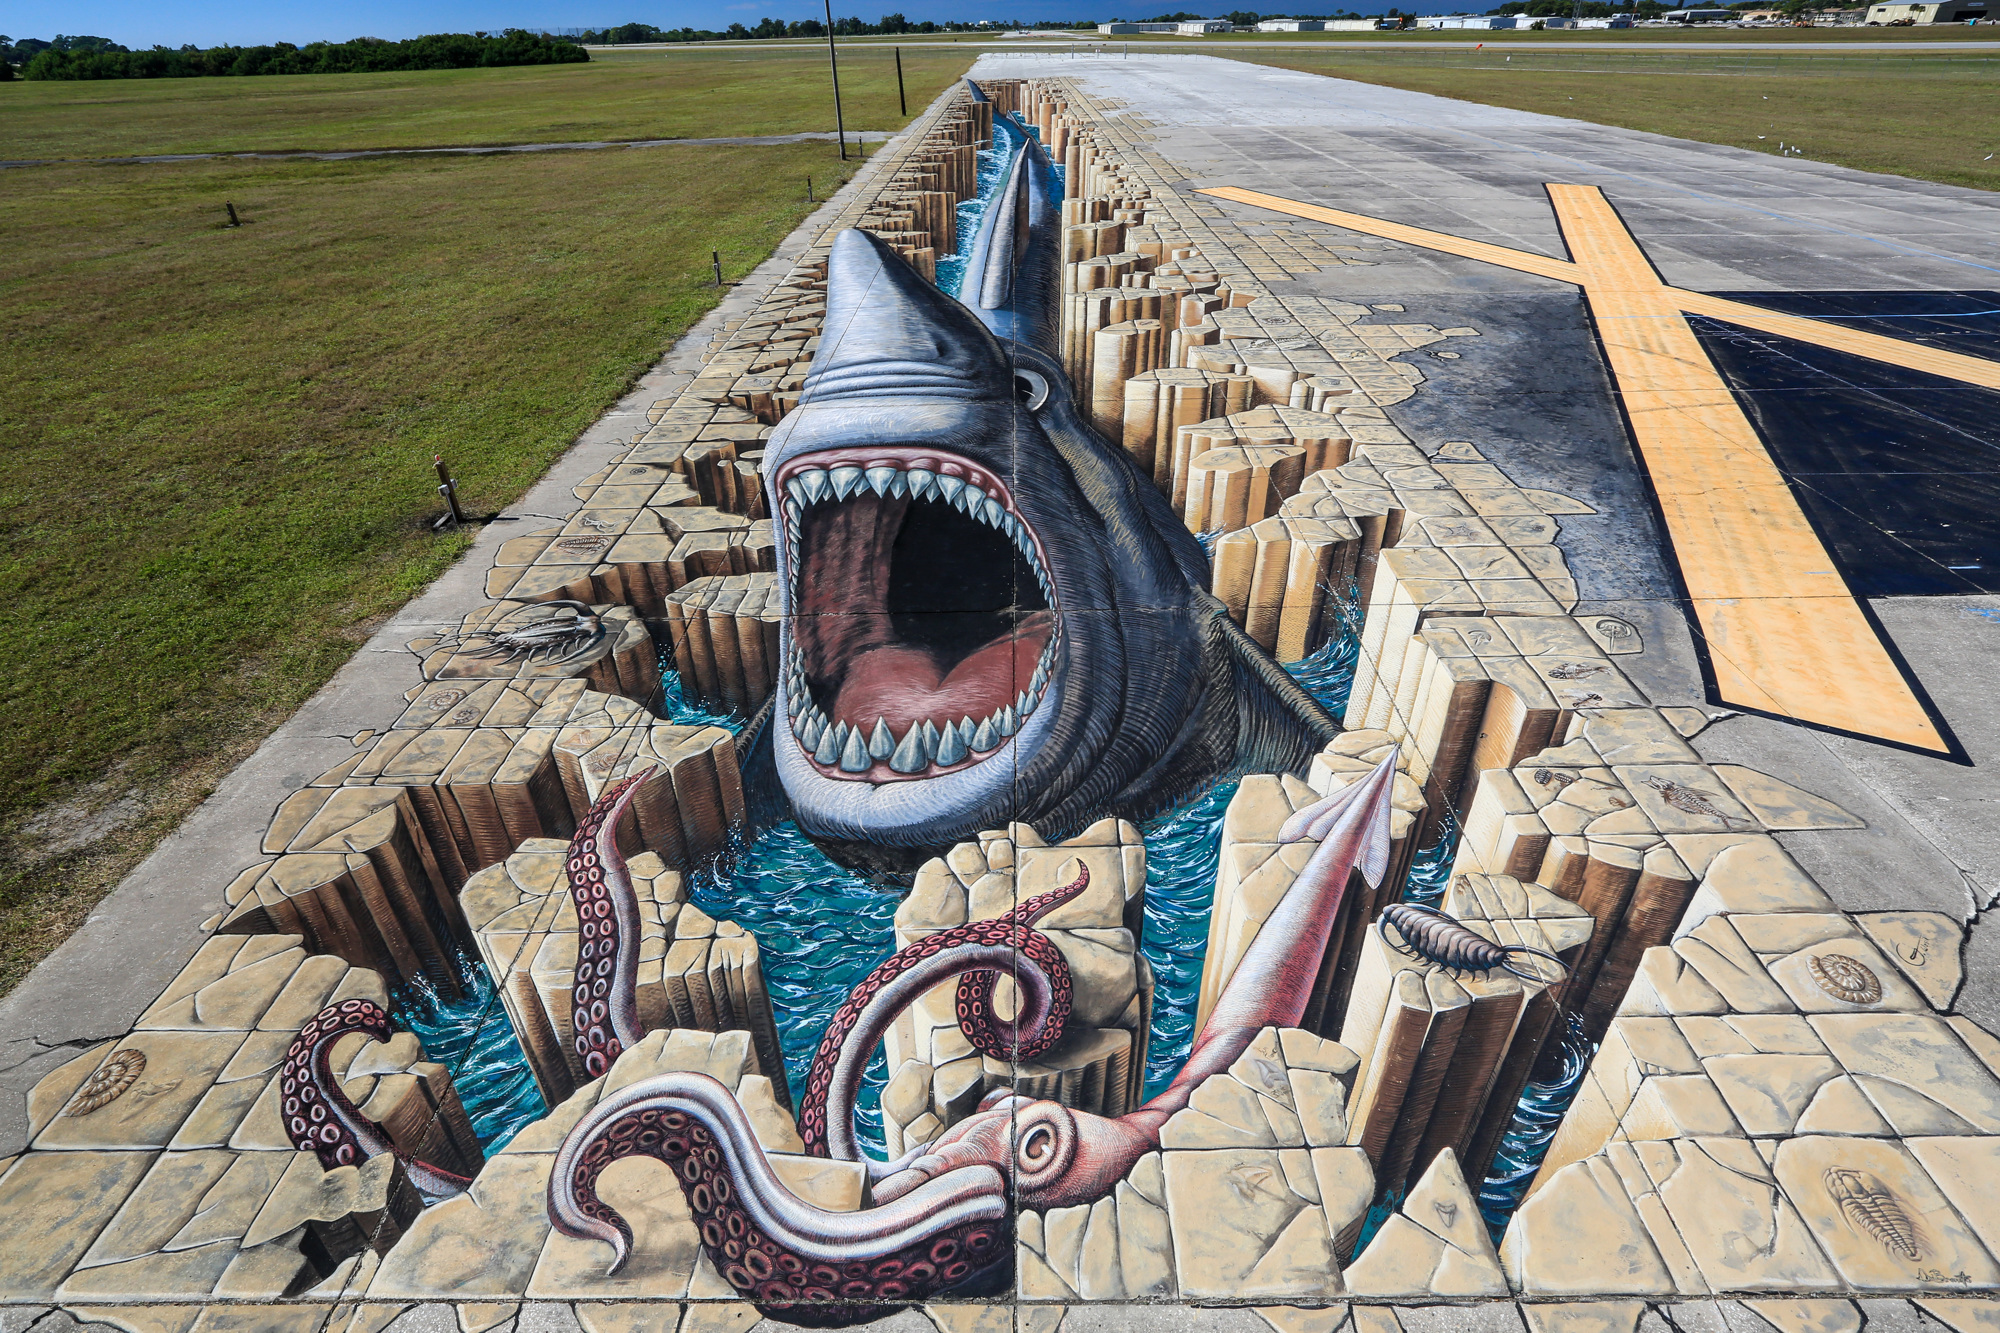 Chalk Festival artists set a world record with this gigantic shark in 2014. (Courtesy of Chalk Festival)